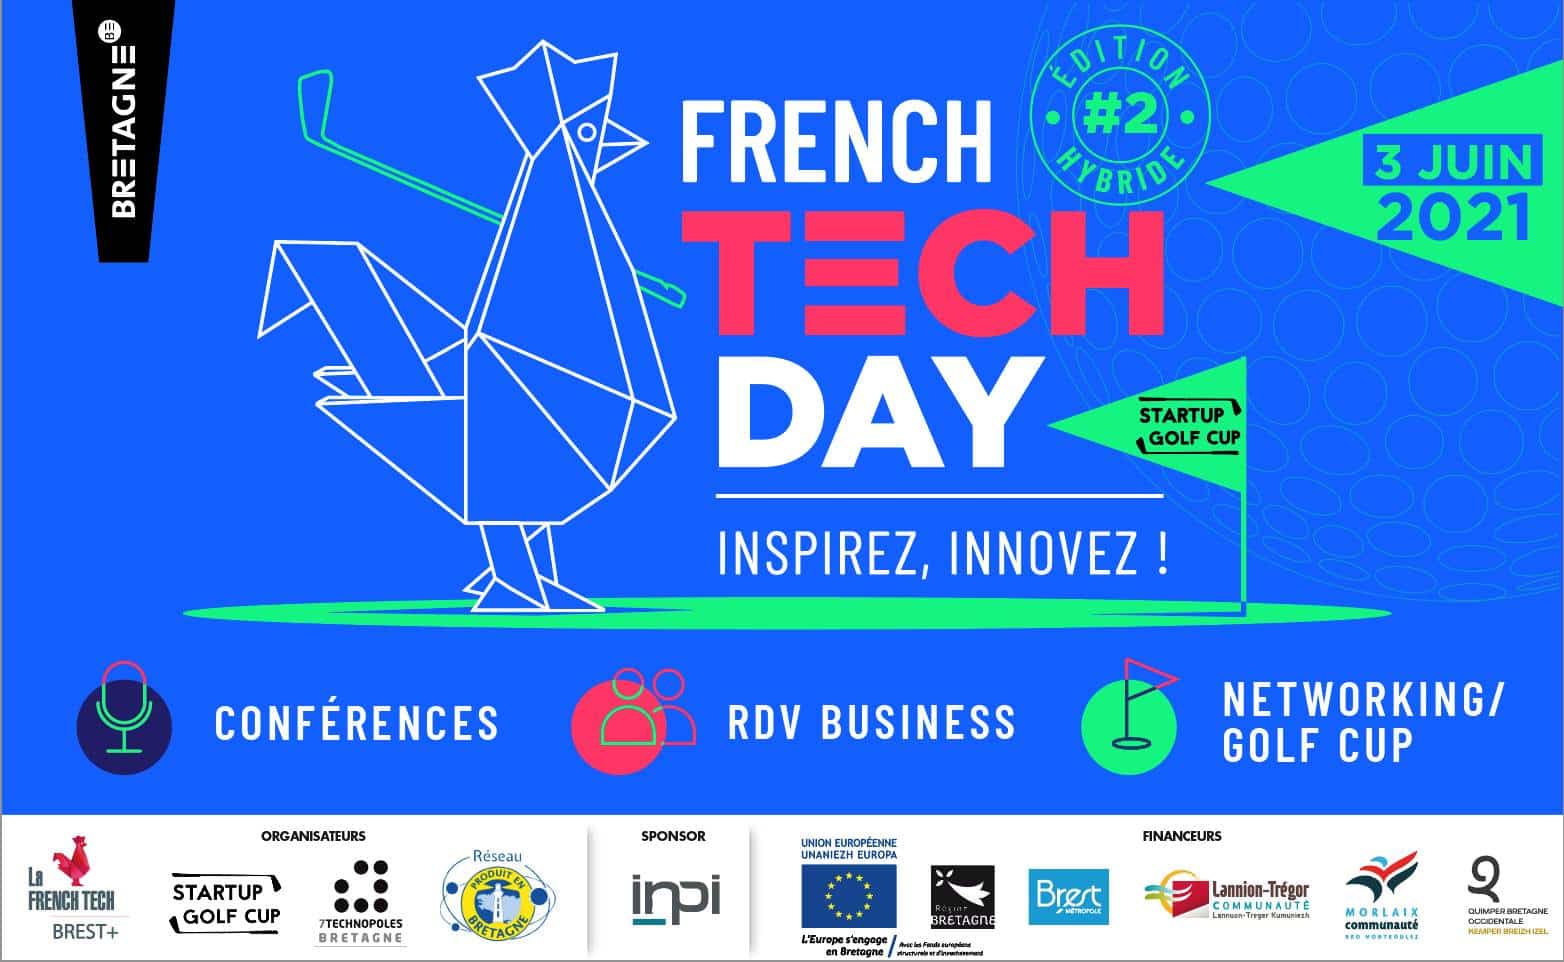 French tech day